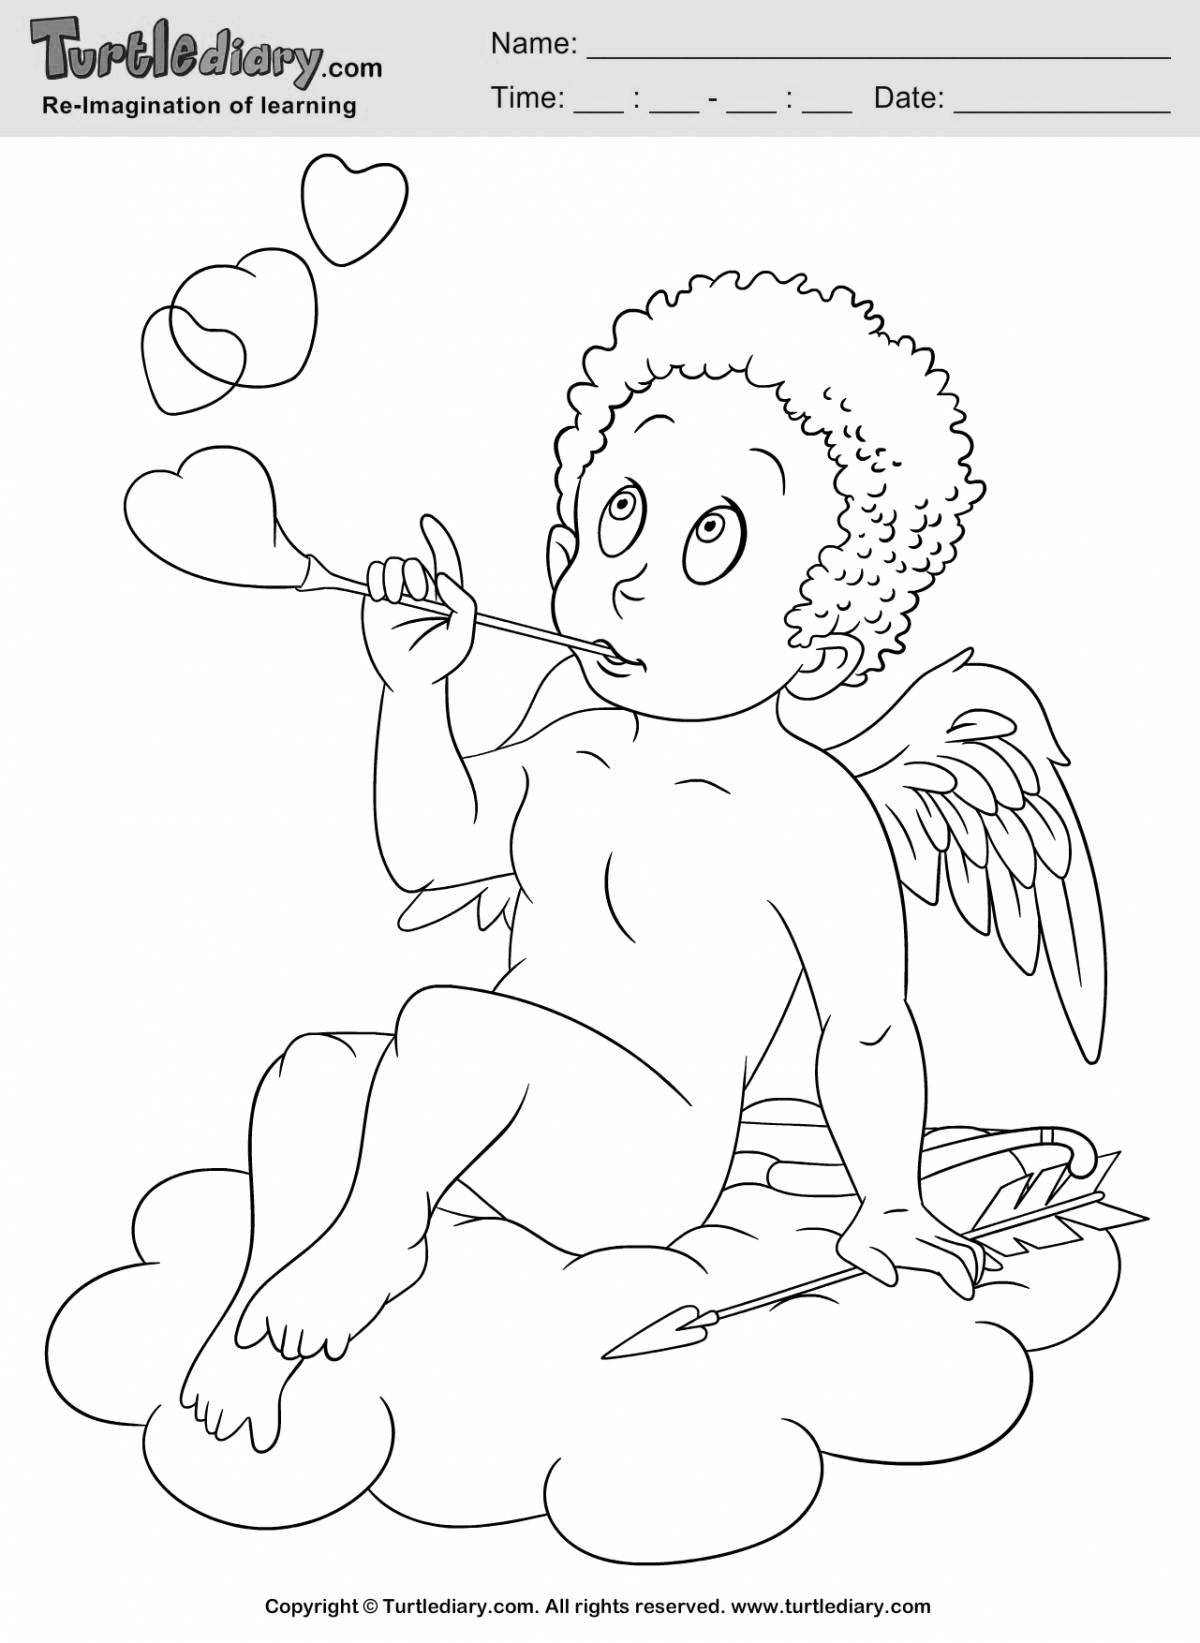 Coloring page adorable cupid with heart